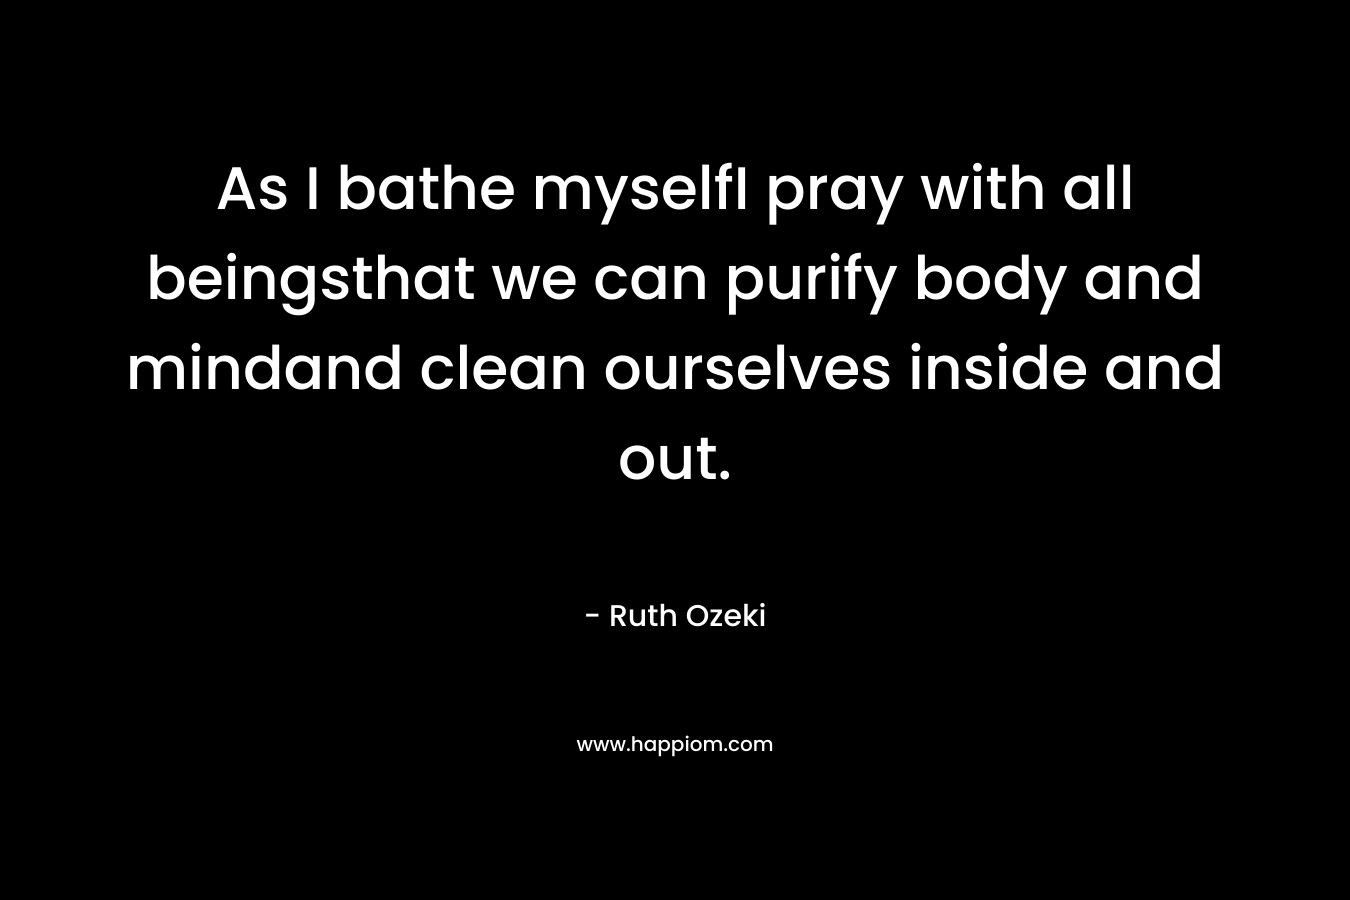 As I bathe myselfI pray with all beingsthat we can purify body and mindand clean ourselves inside and out. – Ruth Ozeki